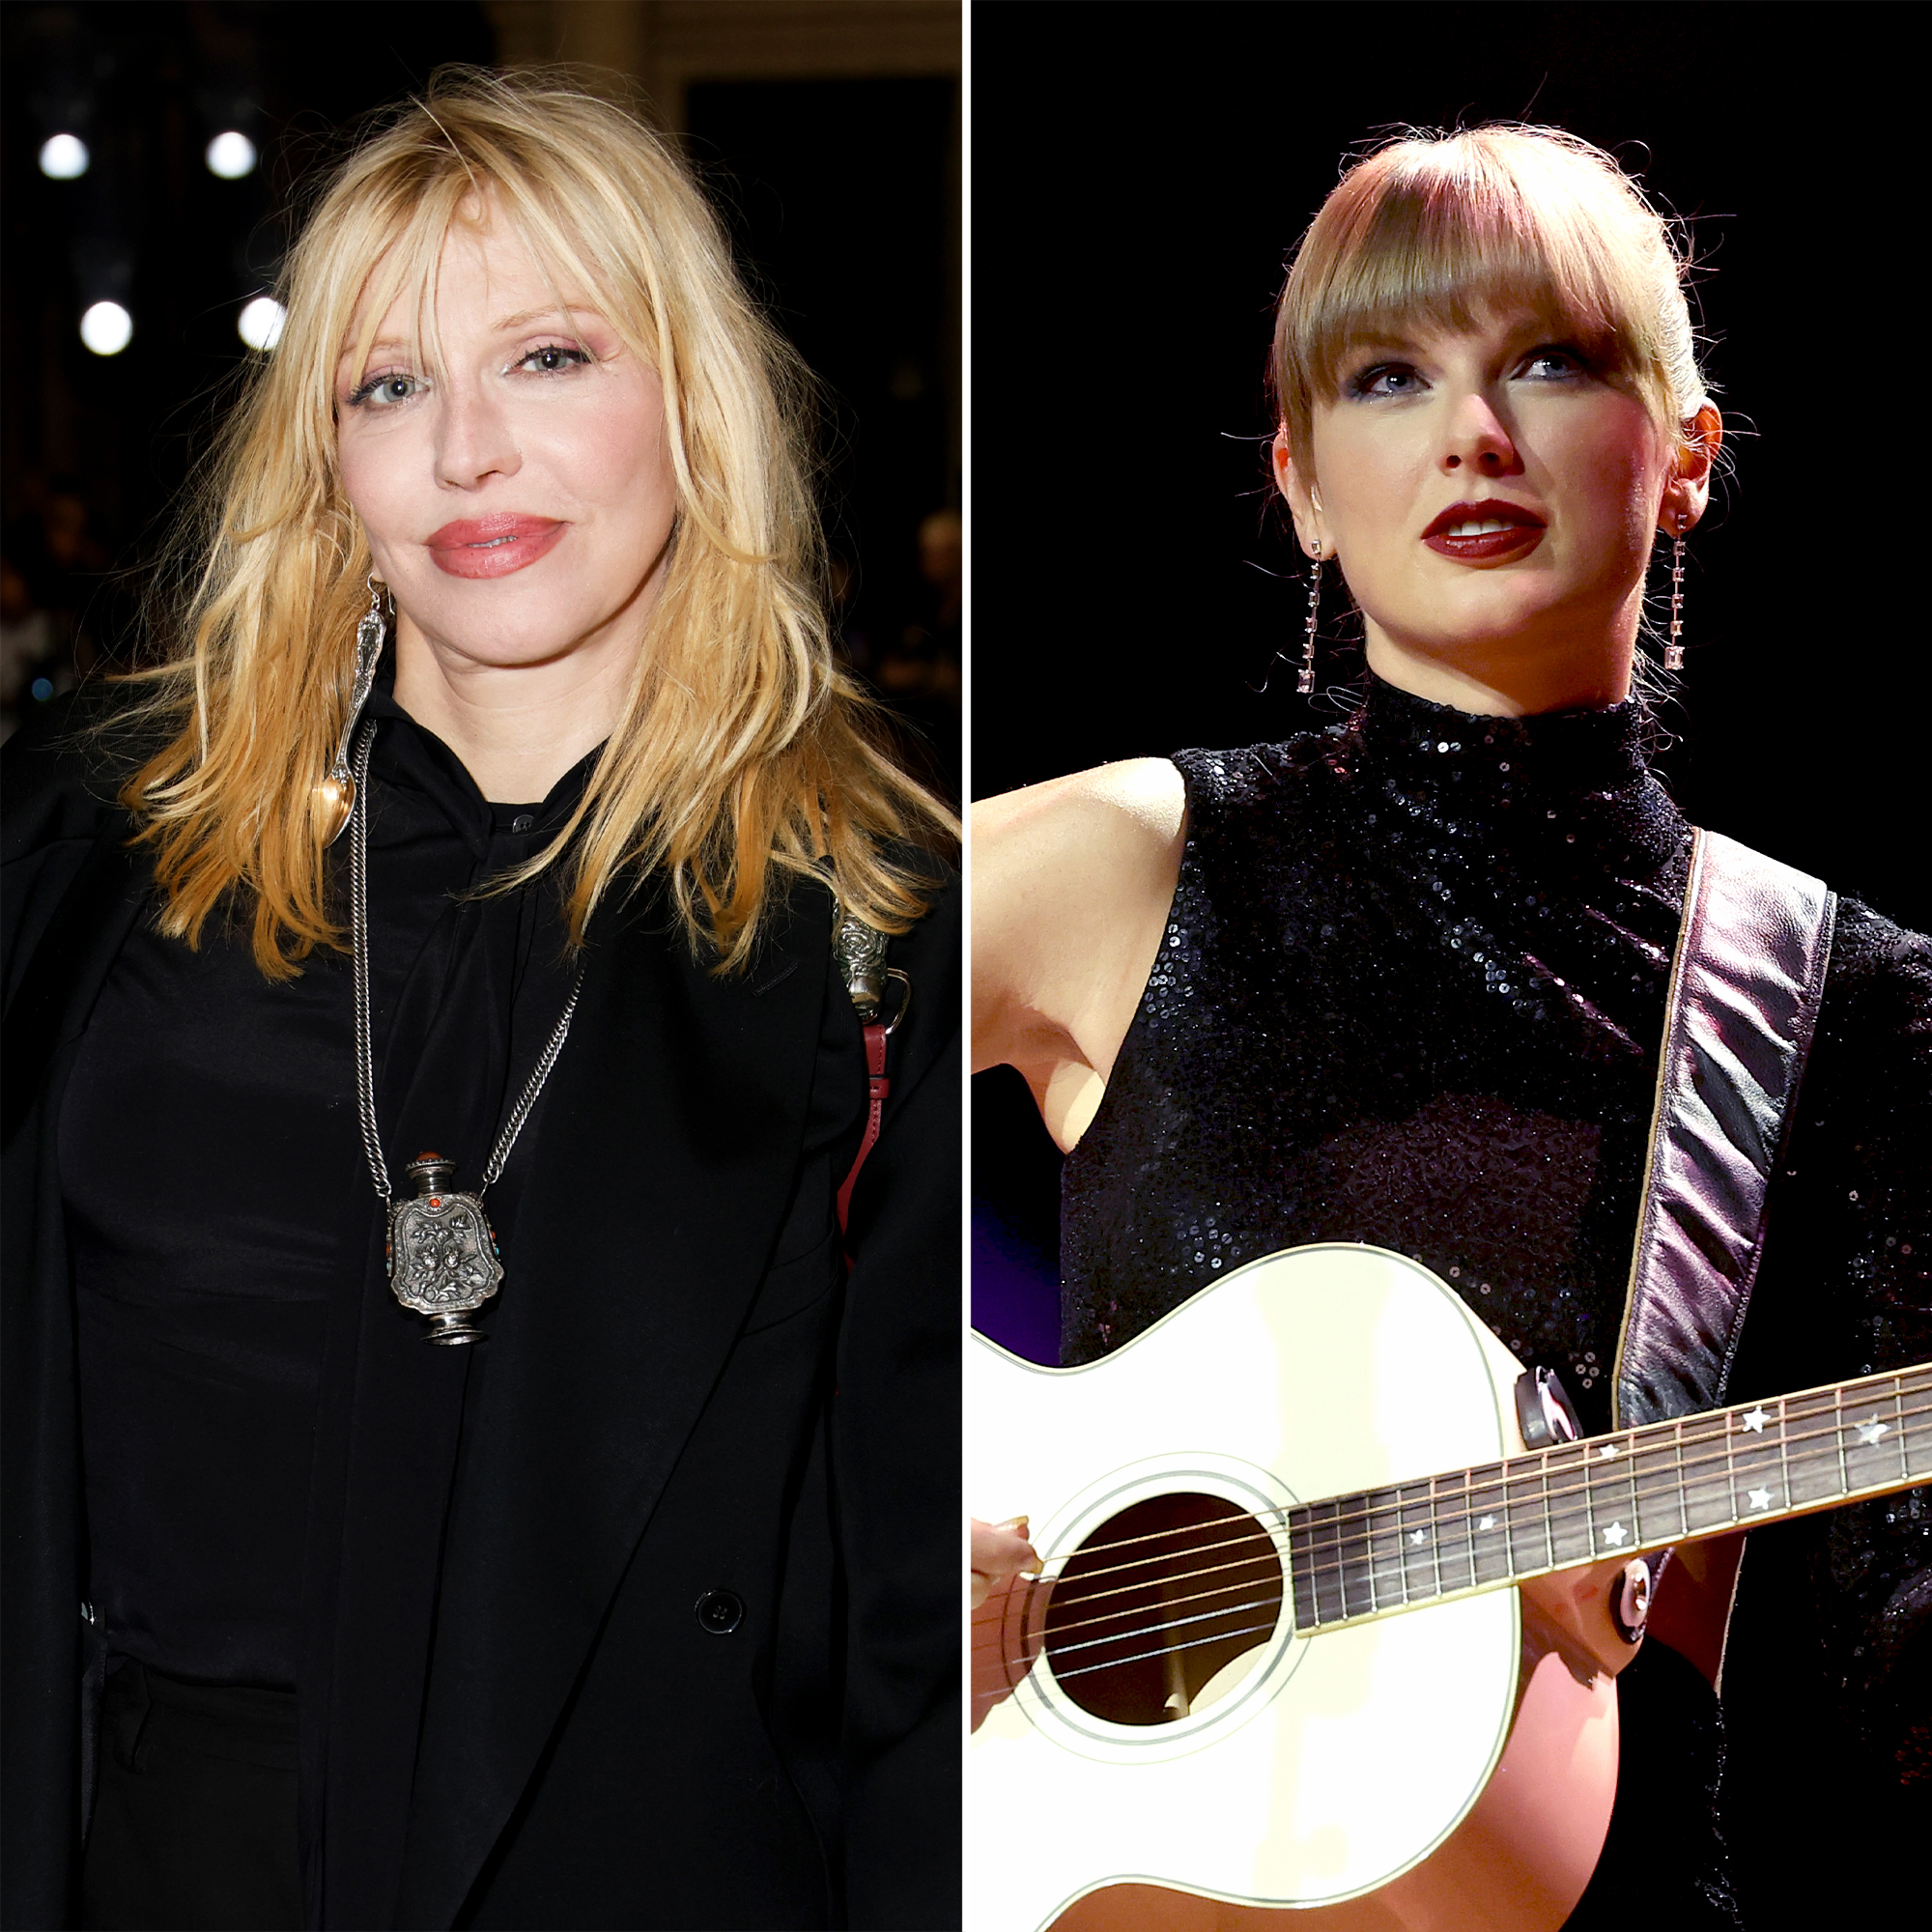 Courtney Love Says Taylor Swift Is 'Not Interesting as an Artist' and 'Not Important'